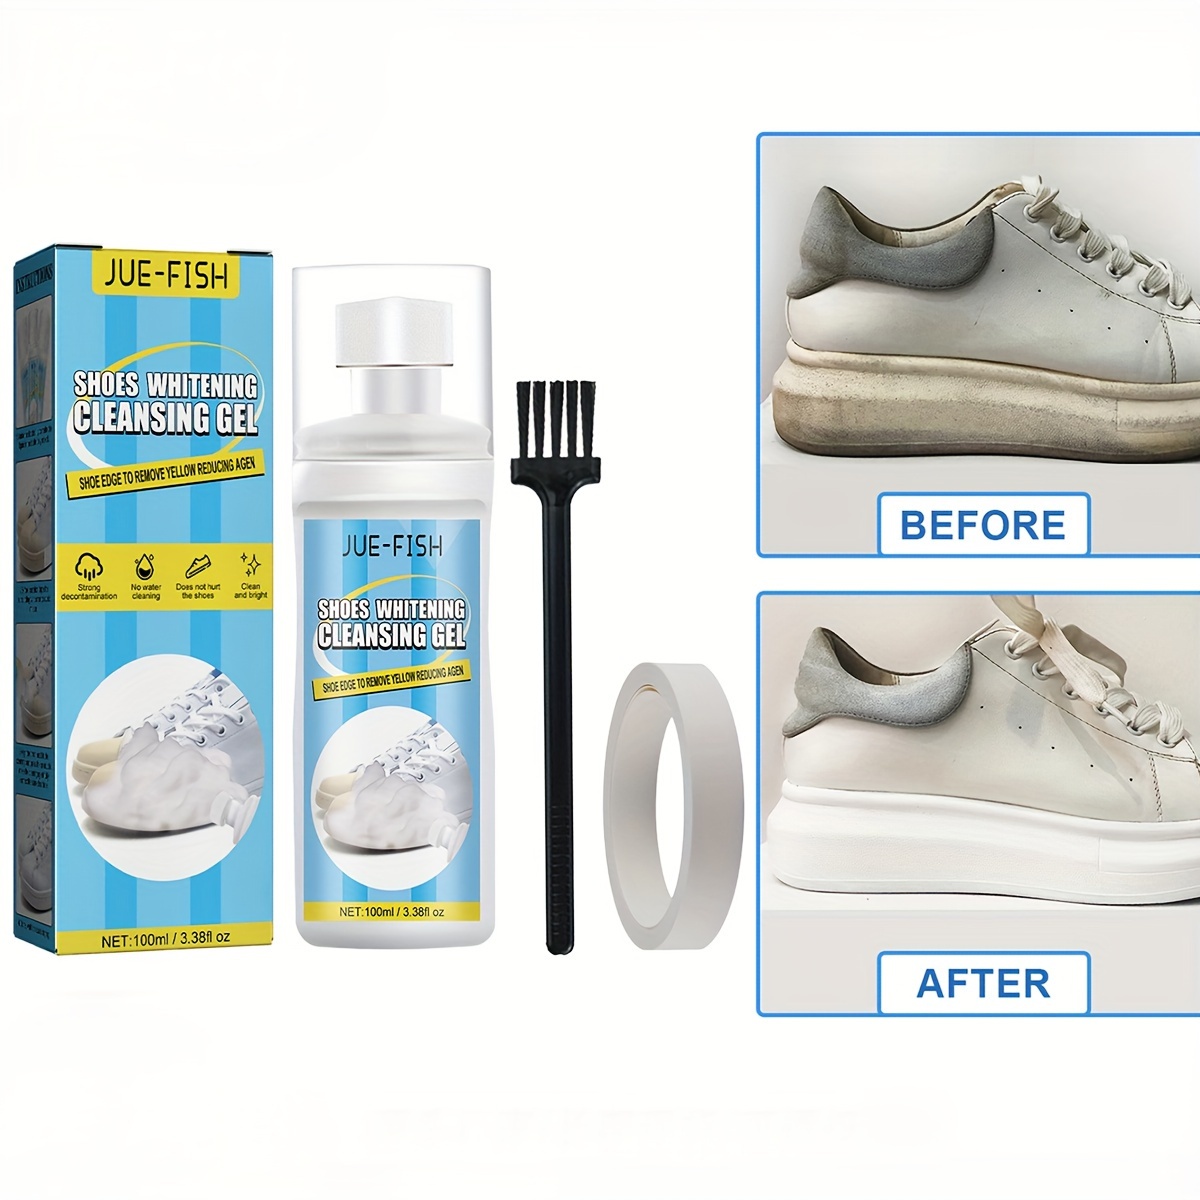 1pc Portable White Shoe Cleaning Foam, Suitable For Sports Shoes, Sneakers,  Effective For Stains Cleaning And Yellowing Removing